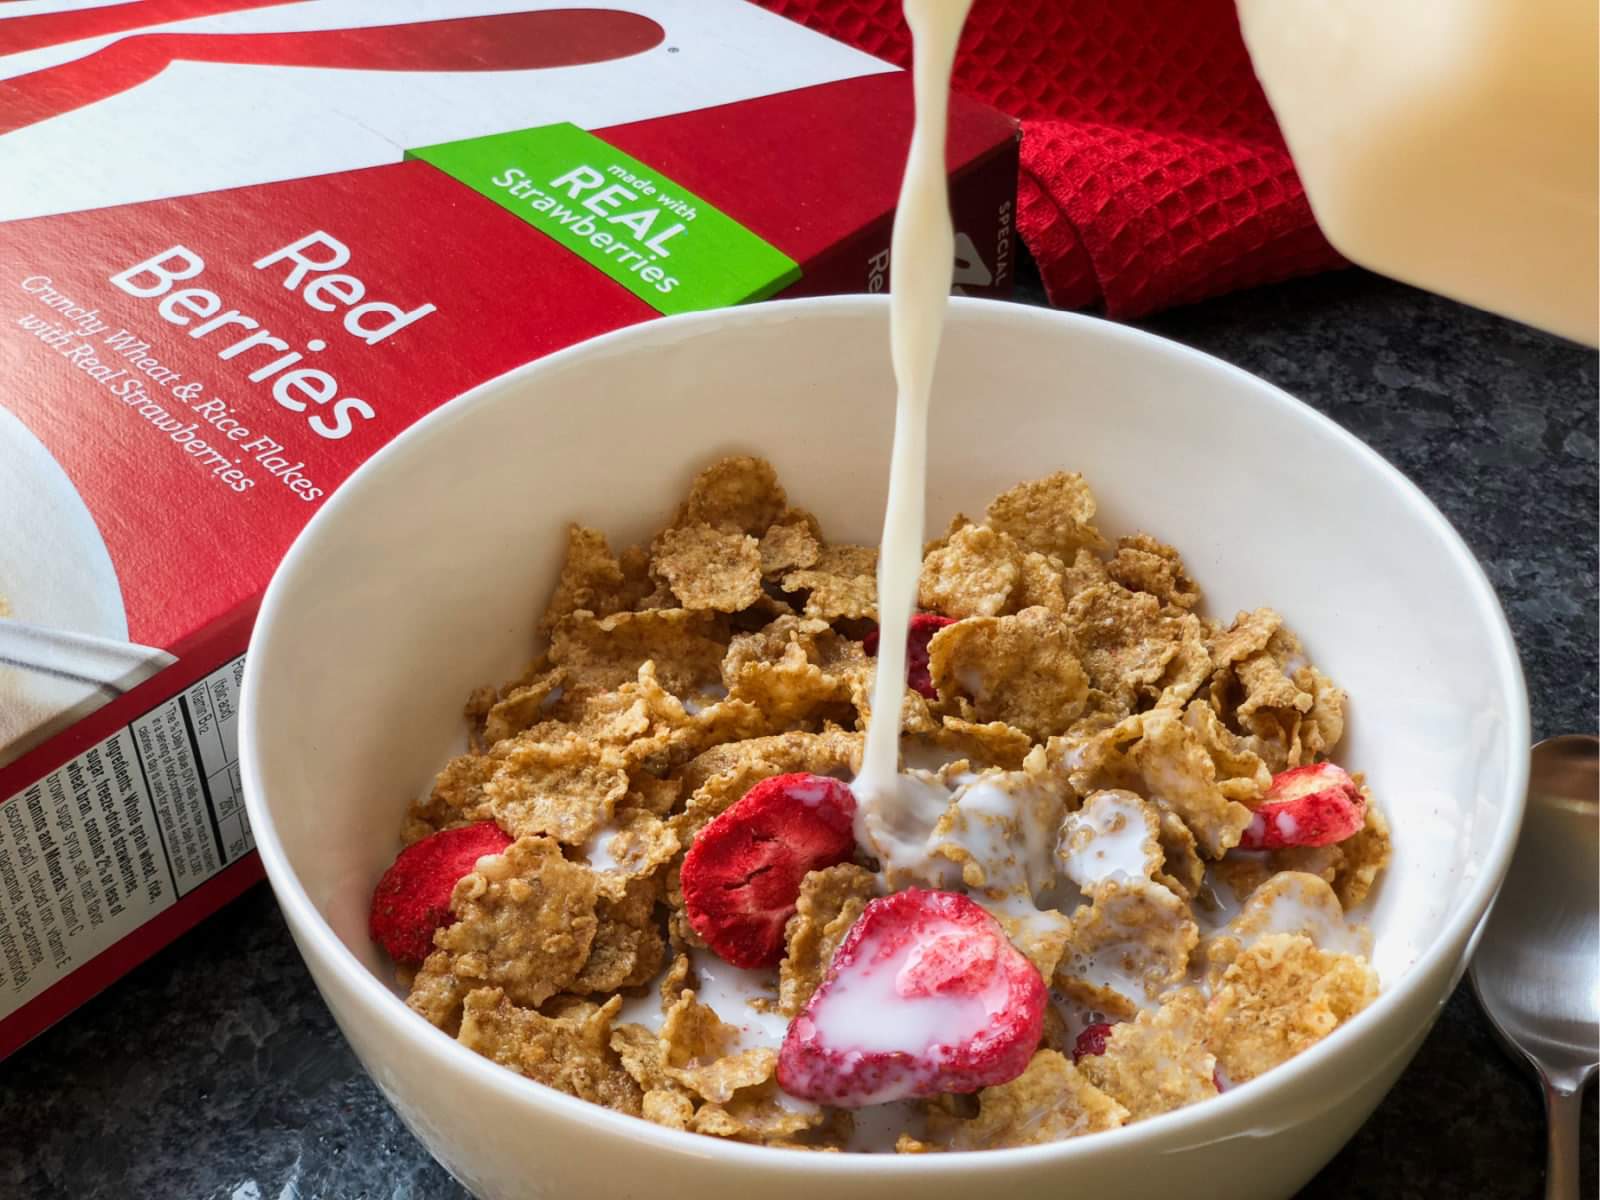 Get Boxes Of Kellogg’s Special K Cereal As Low As 53¢ Per Box At Publix